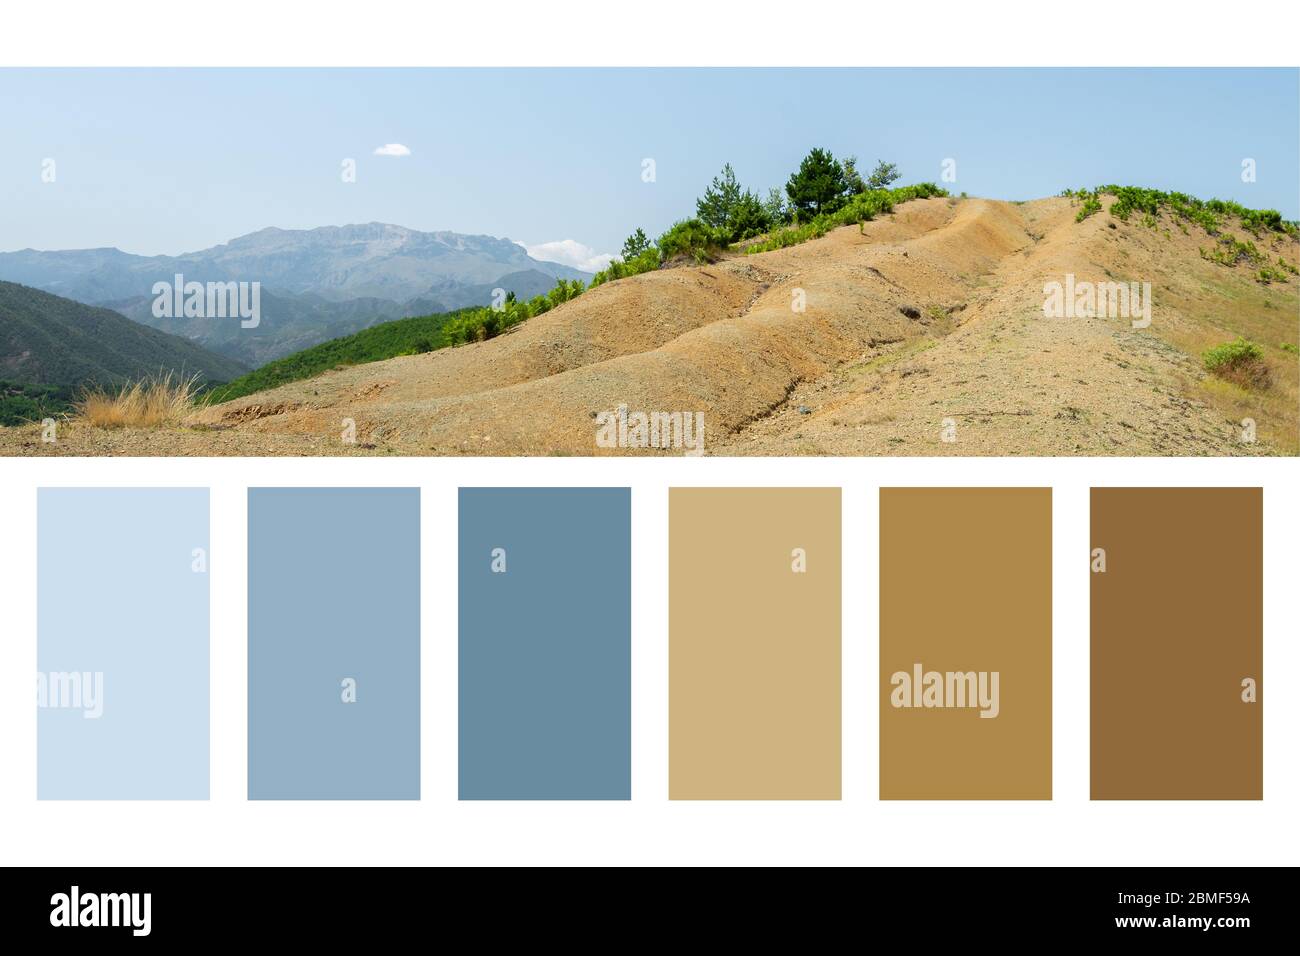 Albanian nature landscape. Sandy hills with rainwater sign on the ground in a colour palette, with complimentary colour swatches Stock Photo